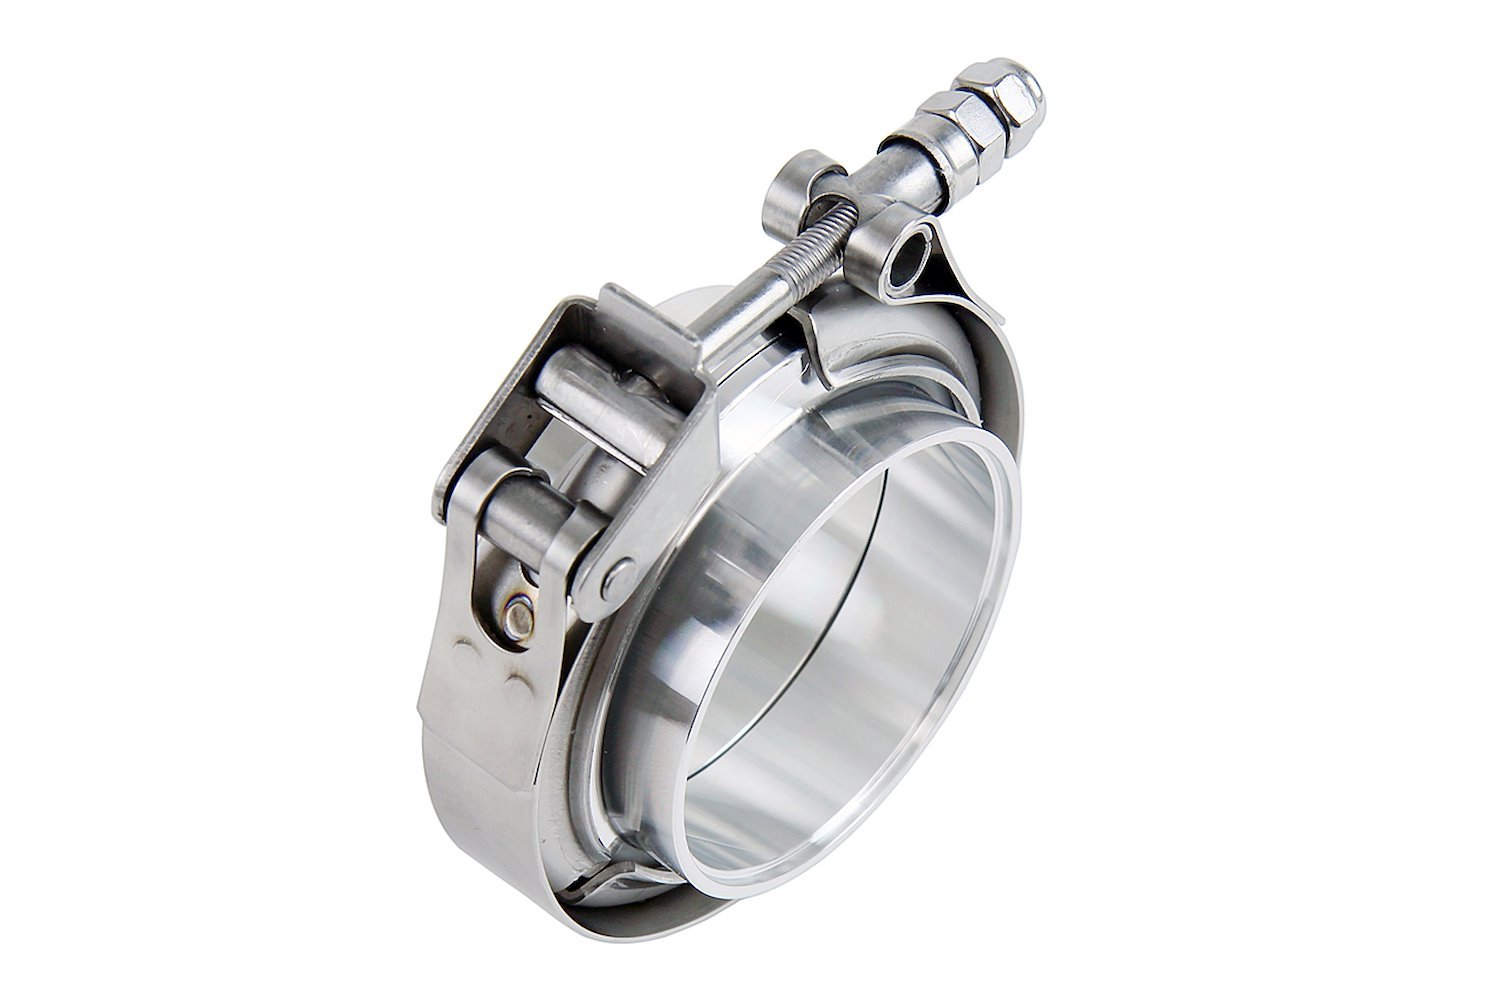 VCKIT-AL-300 V-Band Clamp w/ Interlocking Aluminum Flanges, For 3 in. OD Tubing.